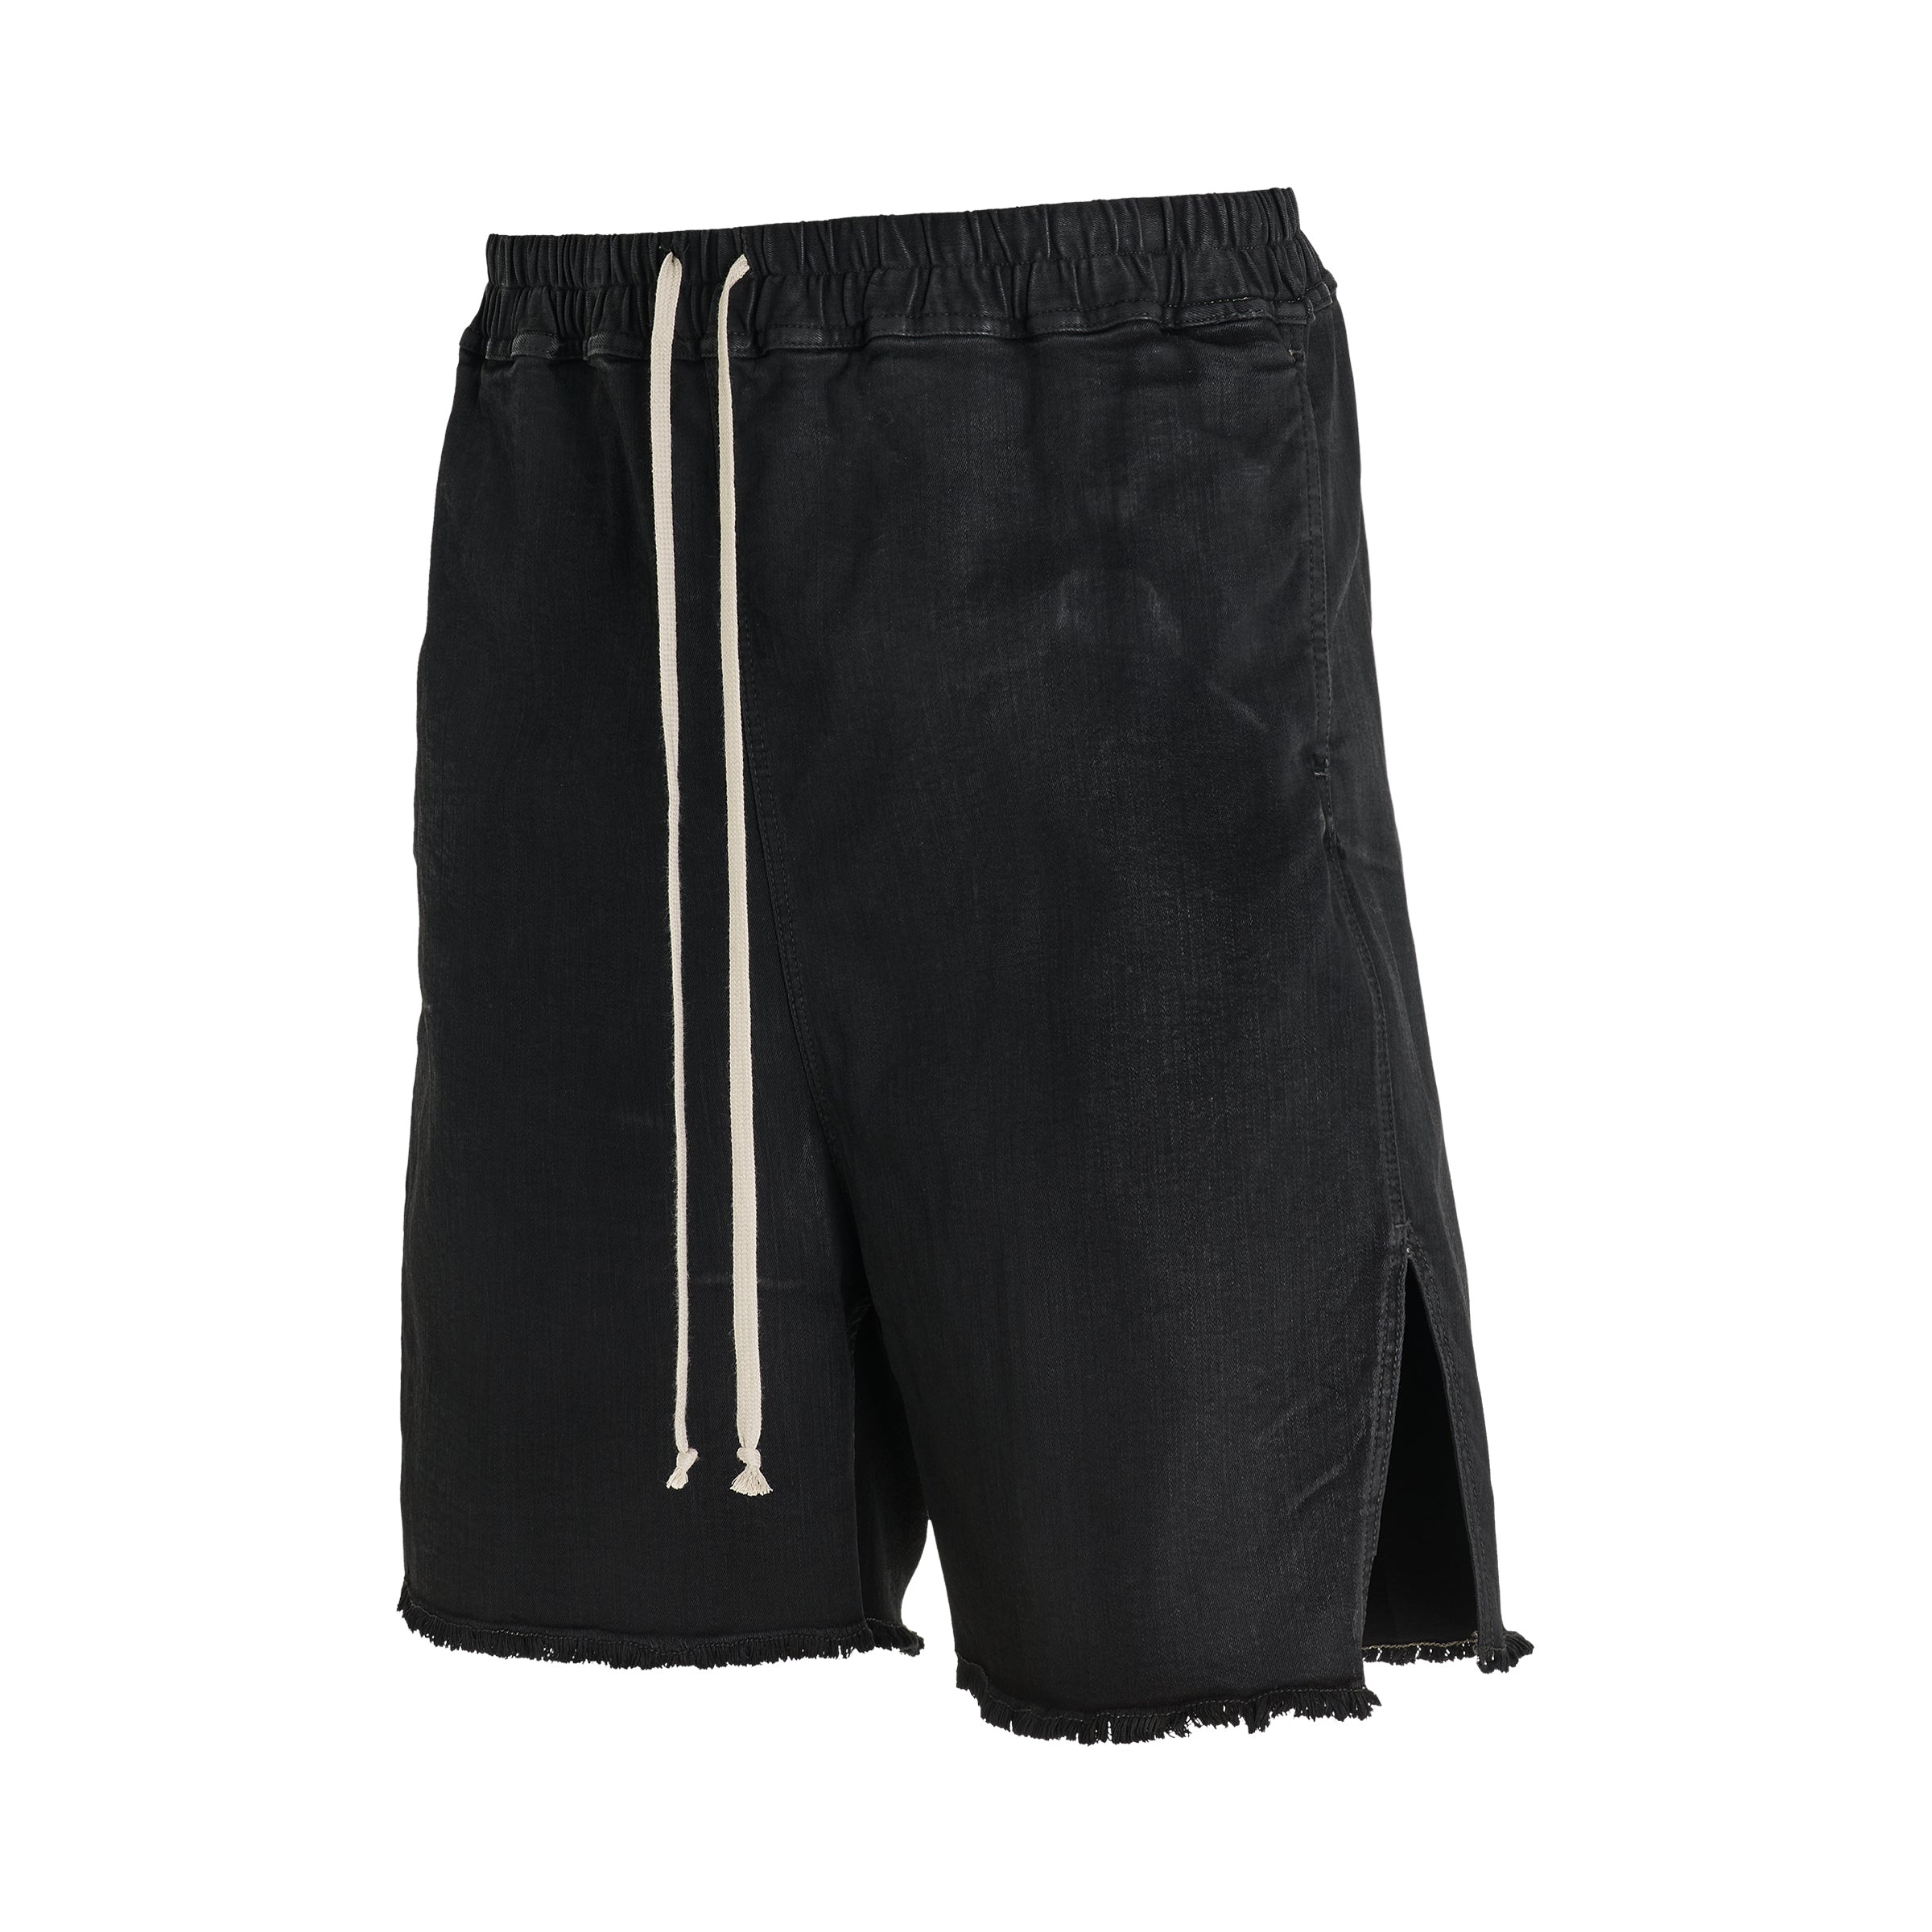 Long Boxers Shorts in Black Wax - 2